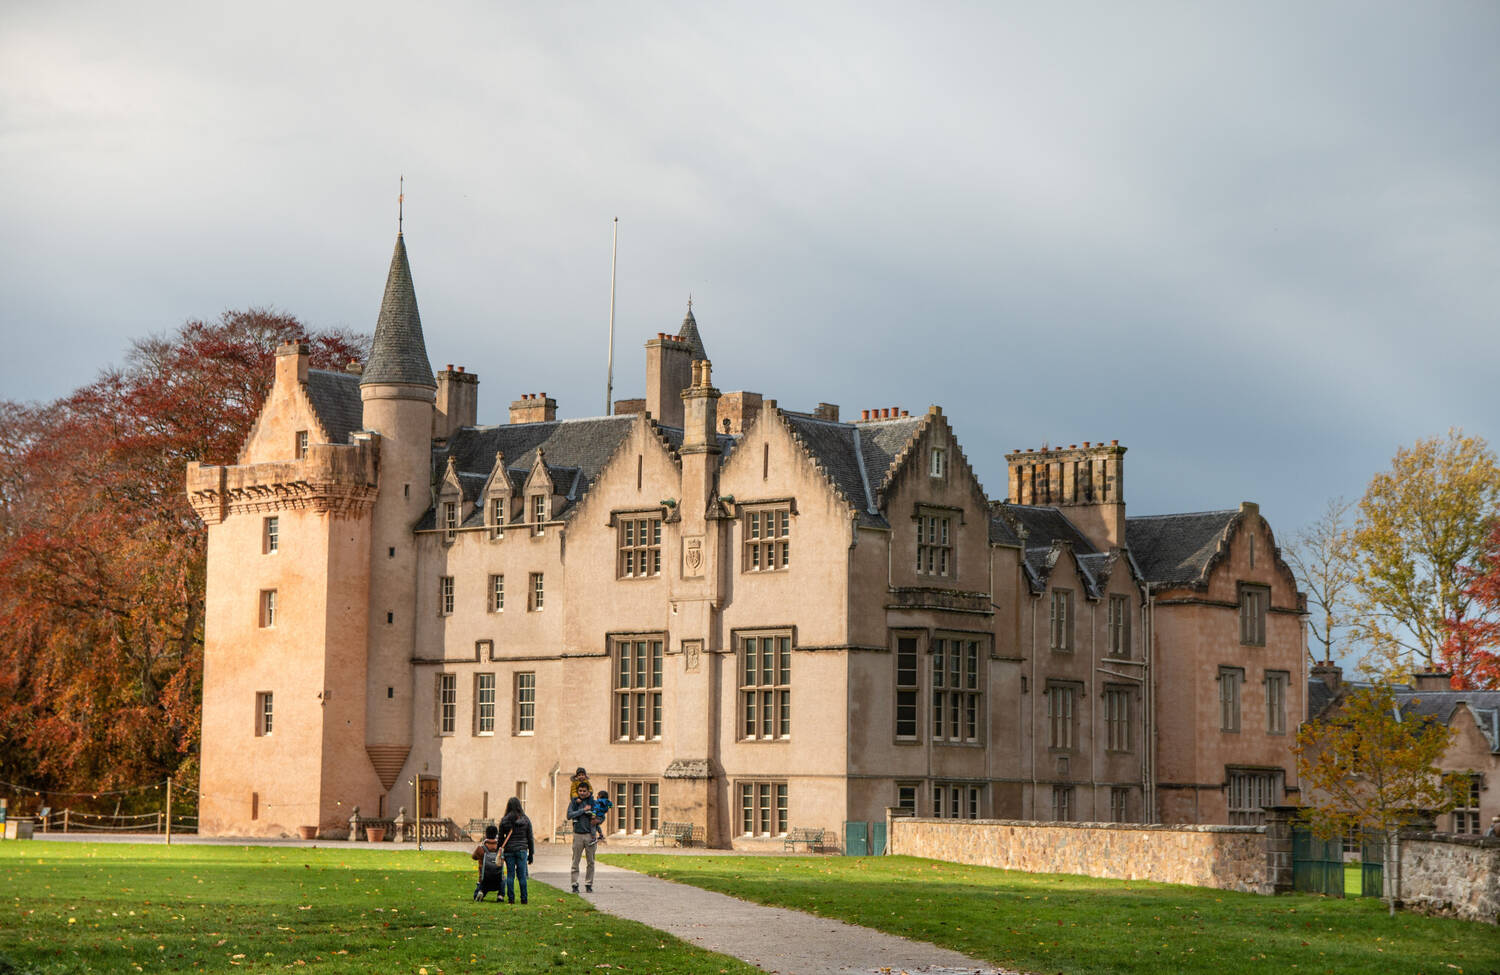 A view of the exterior of Brodie Castle on an autumn day. Tall beech trees behind the castle are red and orange. The walls of the castle have a pink hue. A couple with a pushchair walk along a gravelled path leading up to the castle.